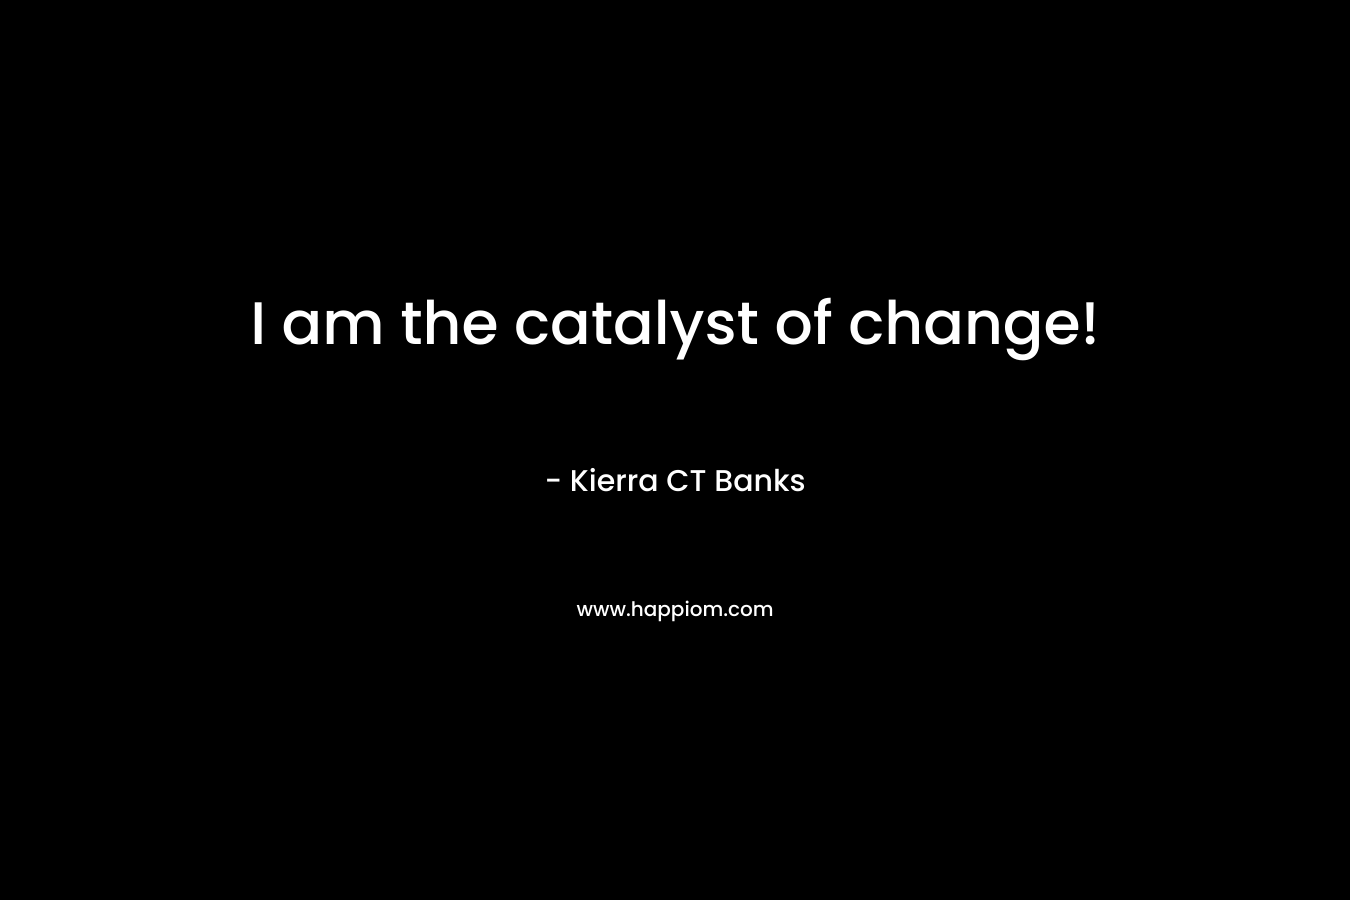 I am the catalyst of change!